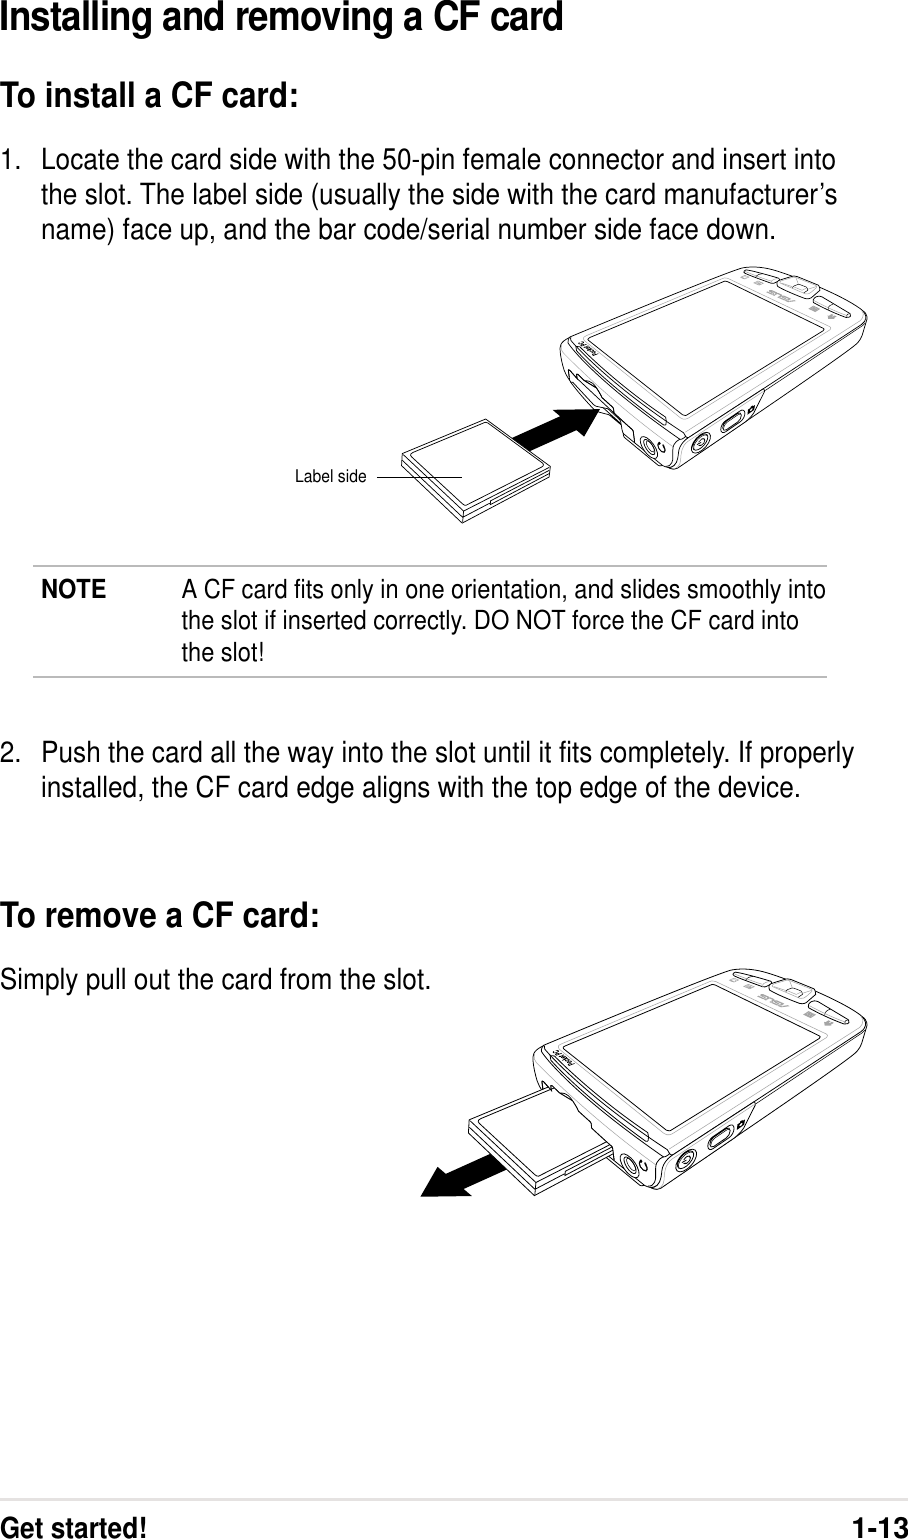 Get started!1-13NOTE A CF card fits only in one orientation, and slides smoothly intothe slot if inserted correctly. DO NOT force the CF card intothe slot!Installing and removing a CF cardTo install a CF card:1. Locate the card side with the 50-pin female connector and insert intothe slot. The label side (usually the side with the card manufacturer’sname) face up, and the bar code/serial number side face down.2. Push the card all the way into the slot until it fits completely. If properlyinstalled, the CF card edge aligns with the top edge of the device.To remove a CF card:Simply pull out the card from the slot.Label side